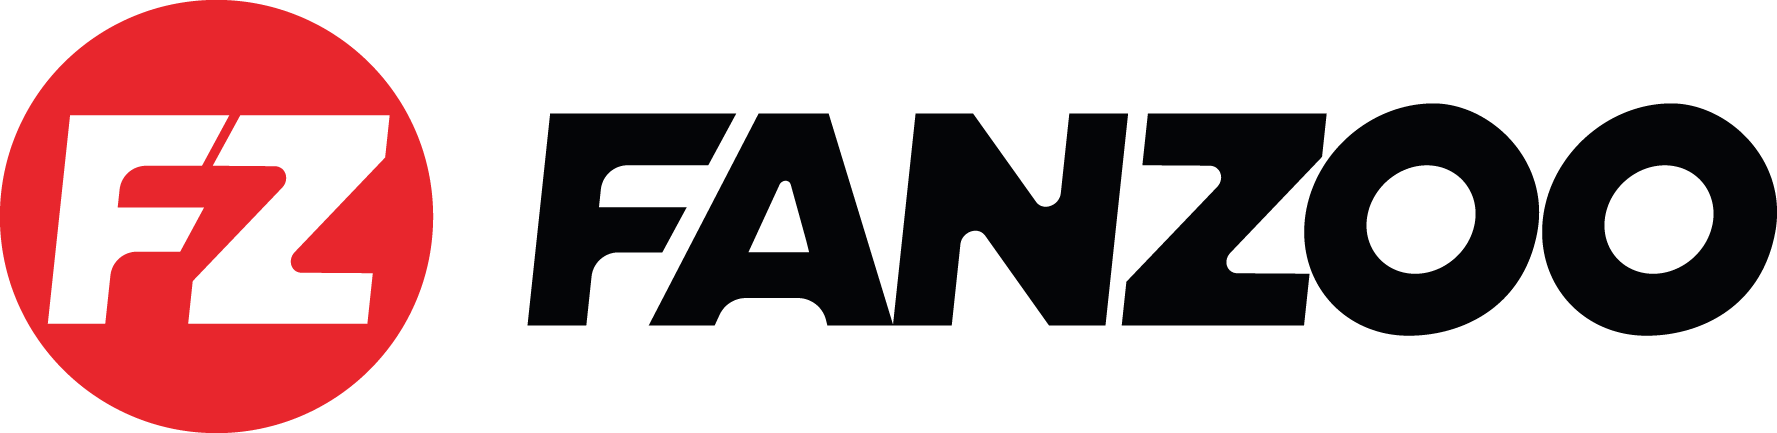 Fanzoo Inc. | Best Prices Sports fan hats, shirts, jerseys and other fan gear